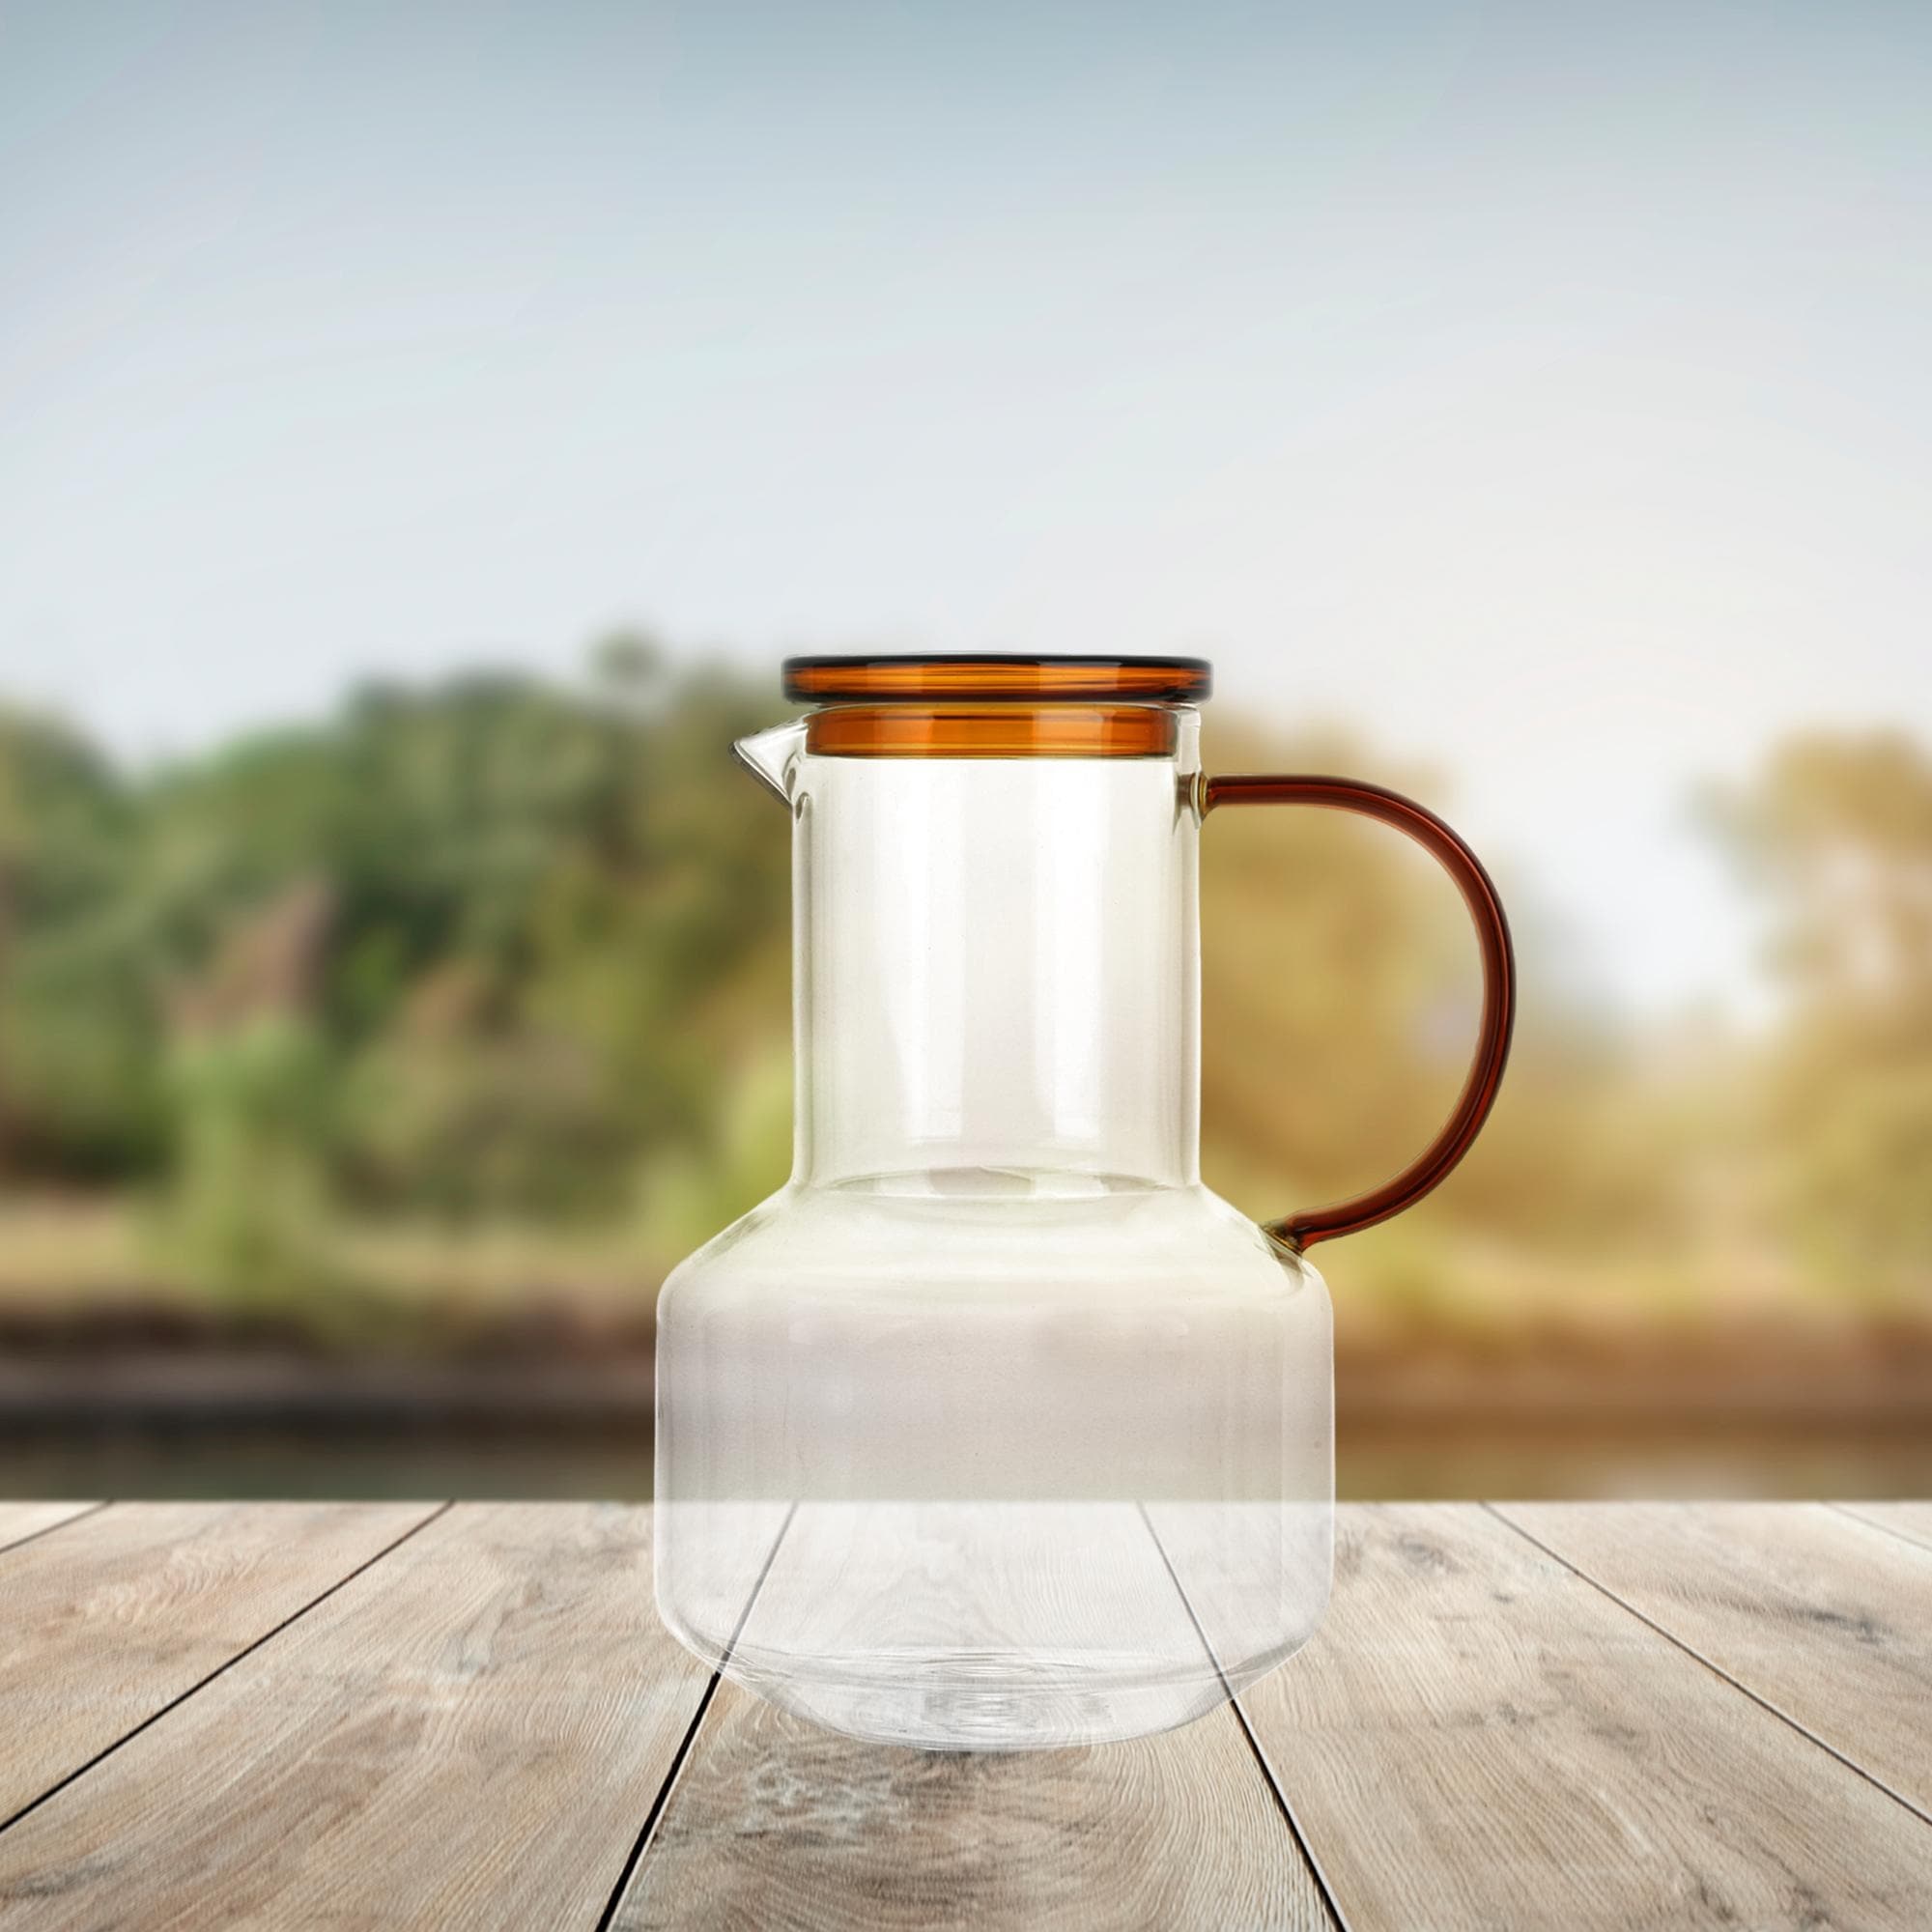 https://ak1.ostkcdn.com/images/products/is/images/direct/bd969af627ecd1f57c6fe4a16078f837b4dba30d/Elle-Decor-Glass-Pitcher-with-Amber-Lid-48-Ounce.jpg